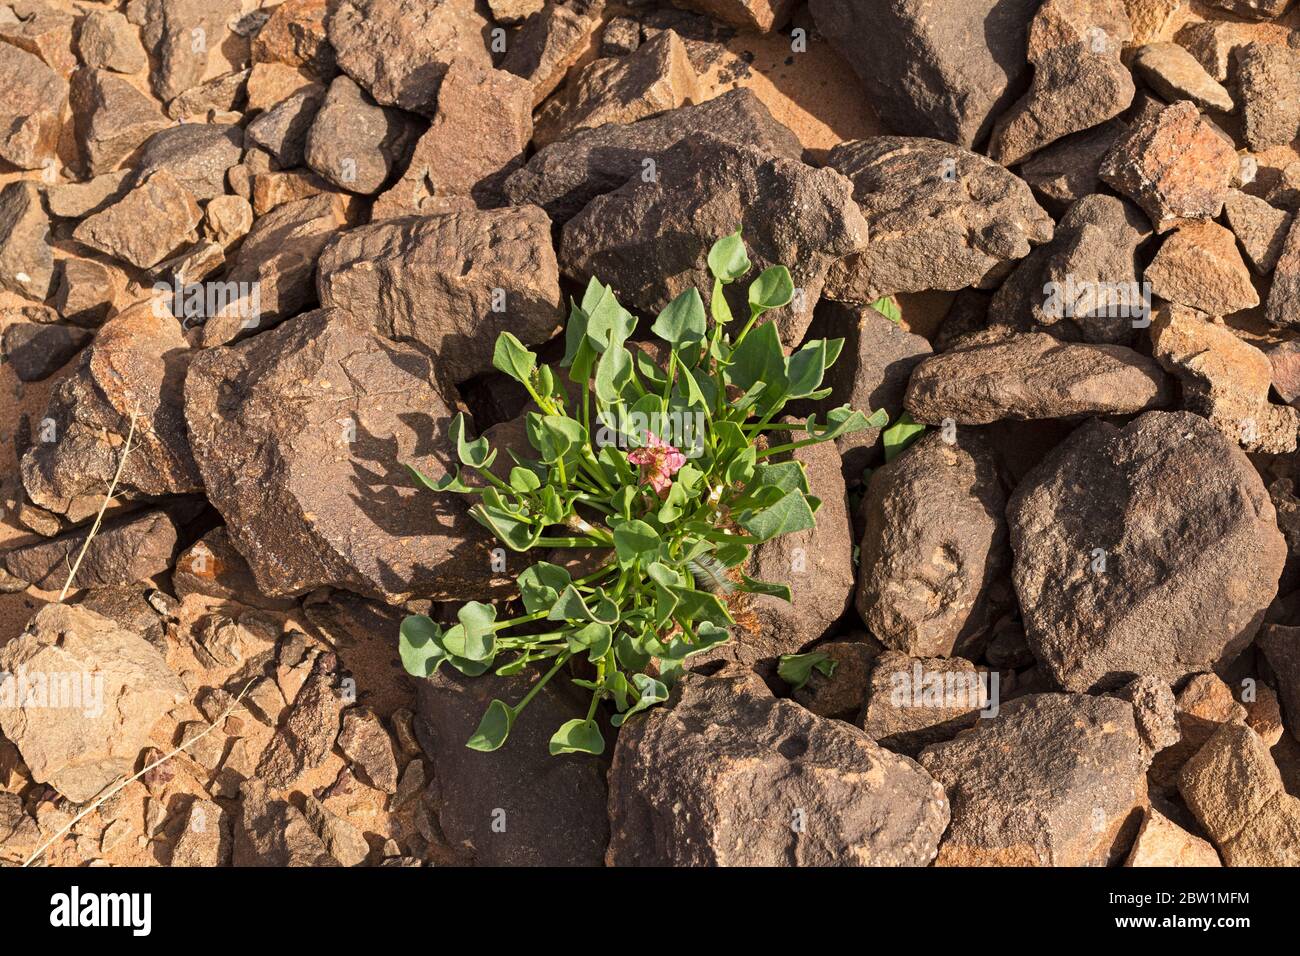 Rumex cyprius knotweed growing in the makhtesh ramon crater in israel among patina covered rocks and stones Stock Photo